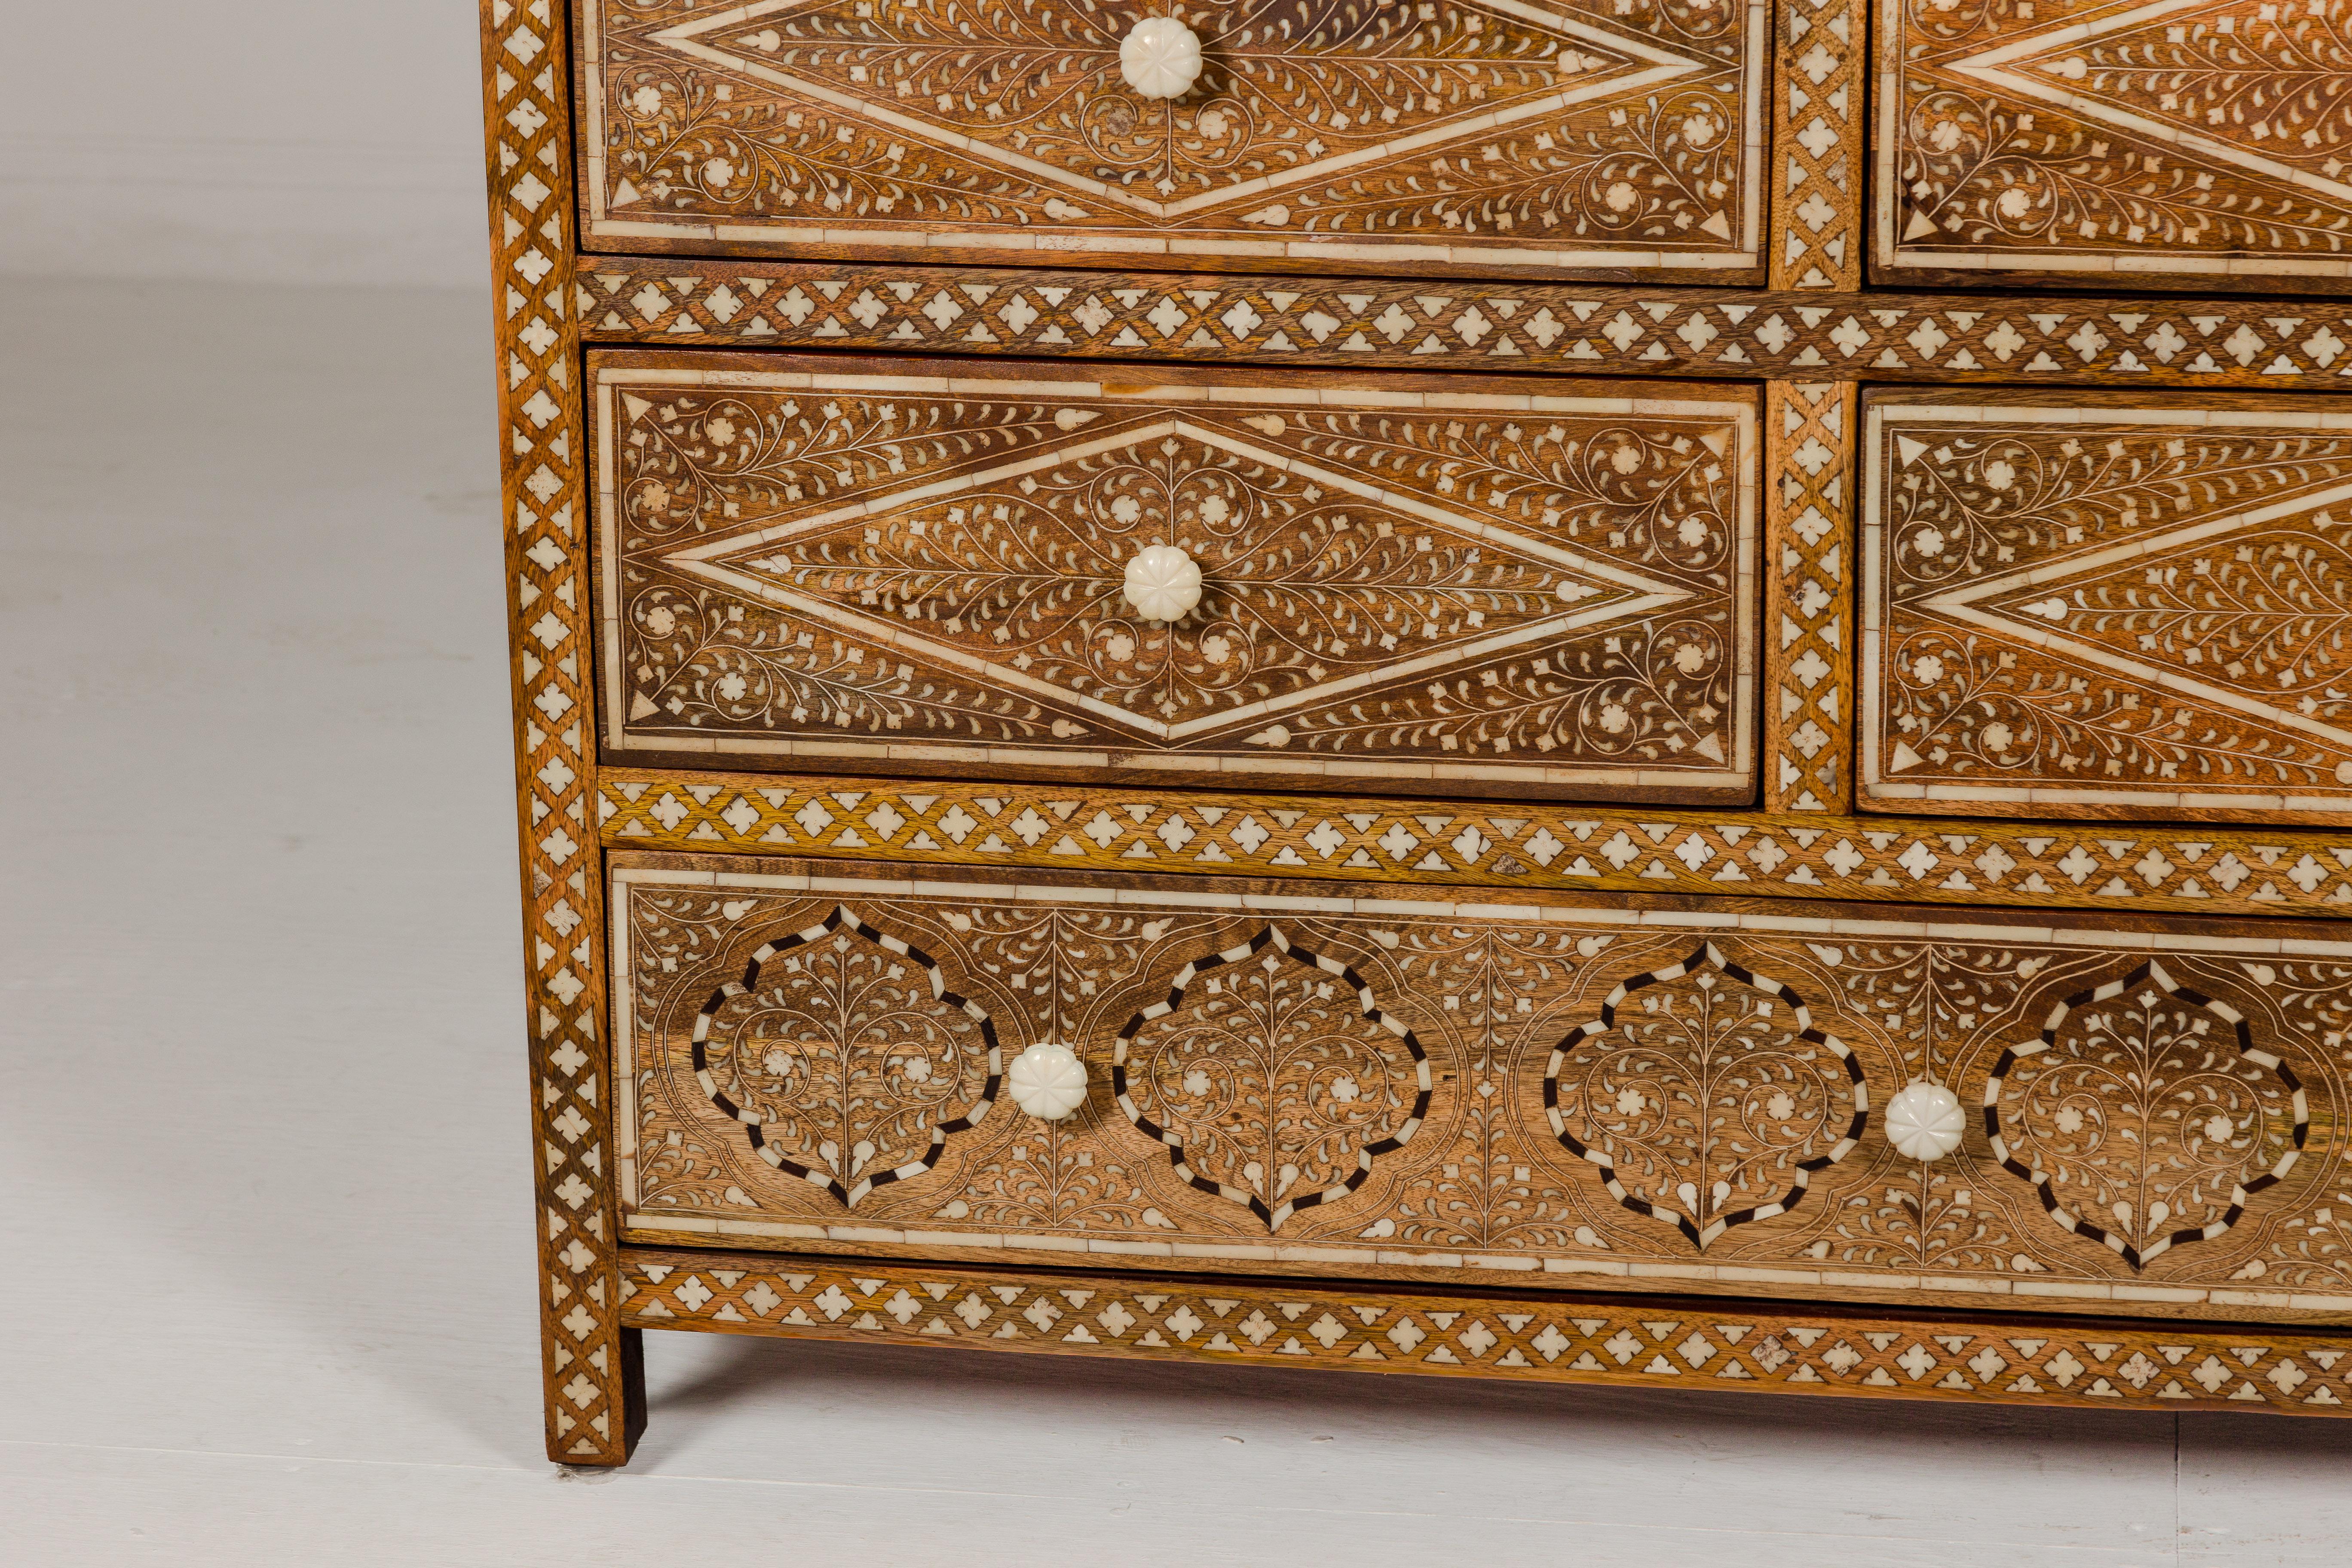 Carved Anglo-Indian Style Mango Wood Dresser with Eight Drawers and Floral Bone Inlay